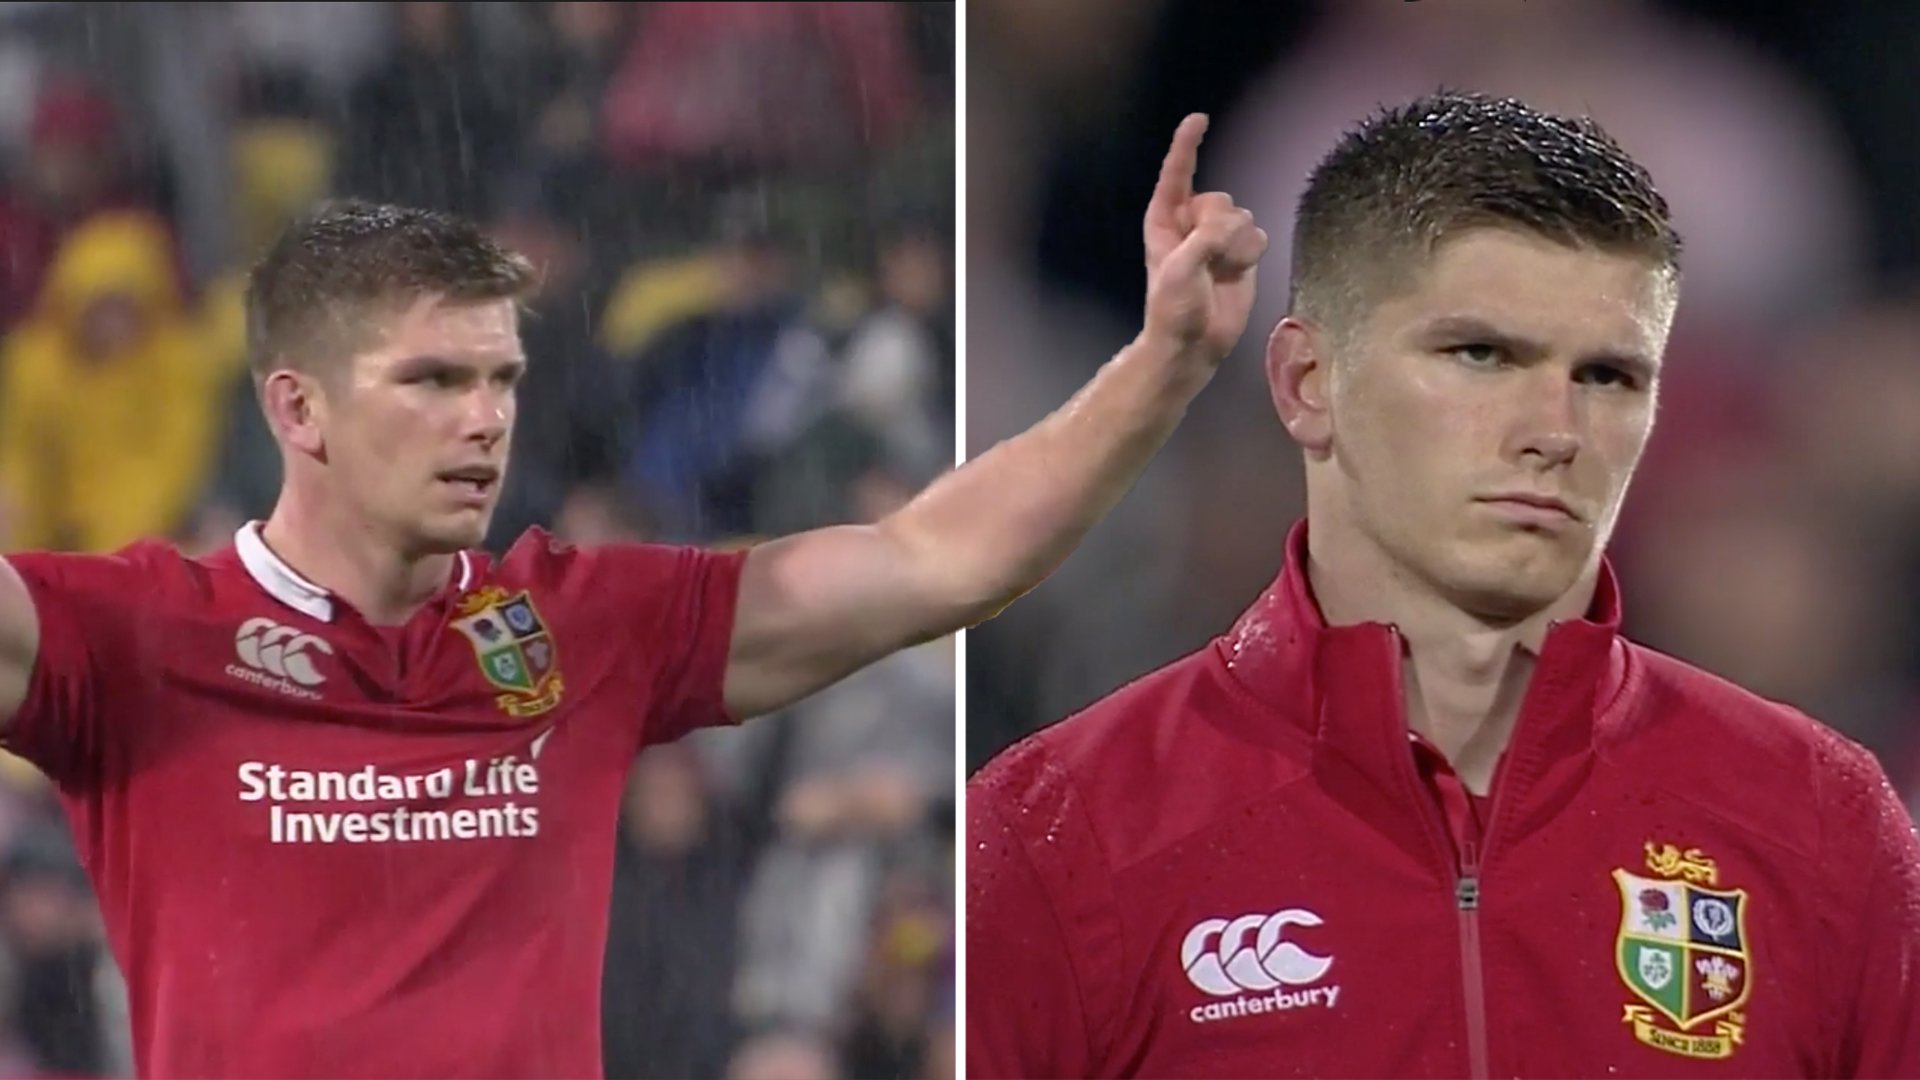 Video shows the 6 minutes in which Owen Farrell single handedly saved the Lions Series